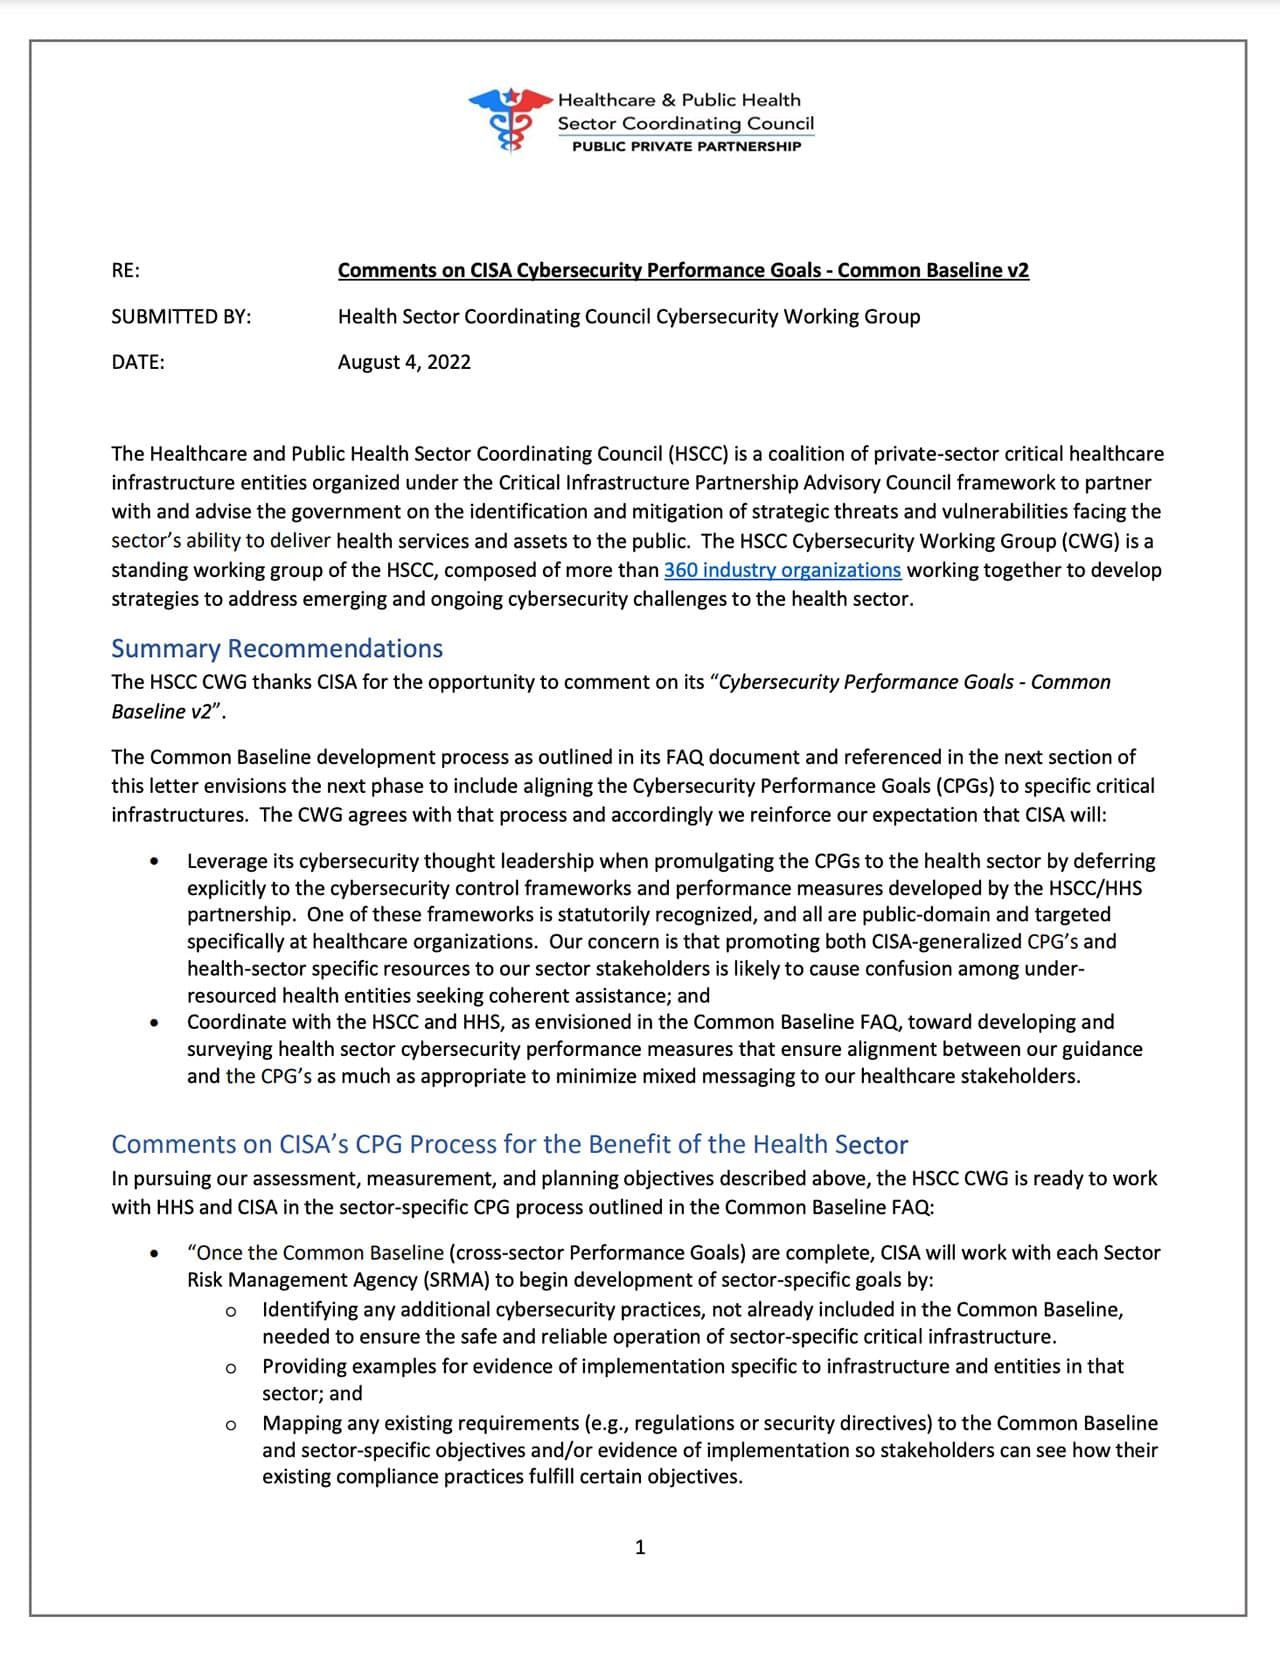 HSCC Comment Letter on CISA Cross-Sector Cybersecurity Performance Goals